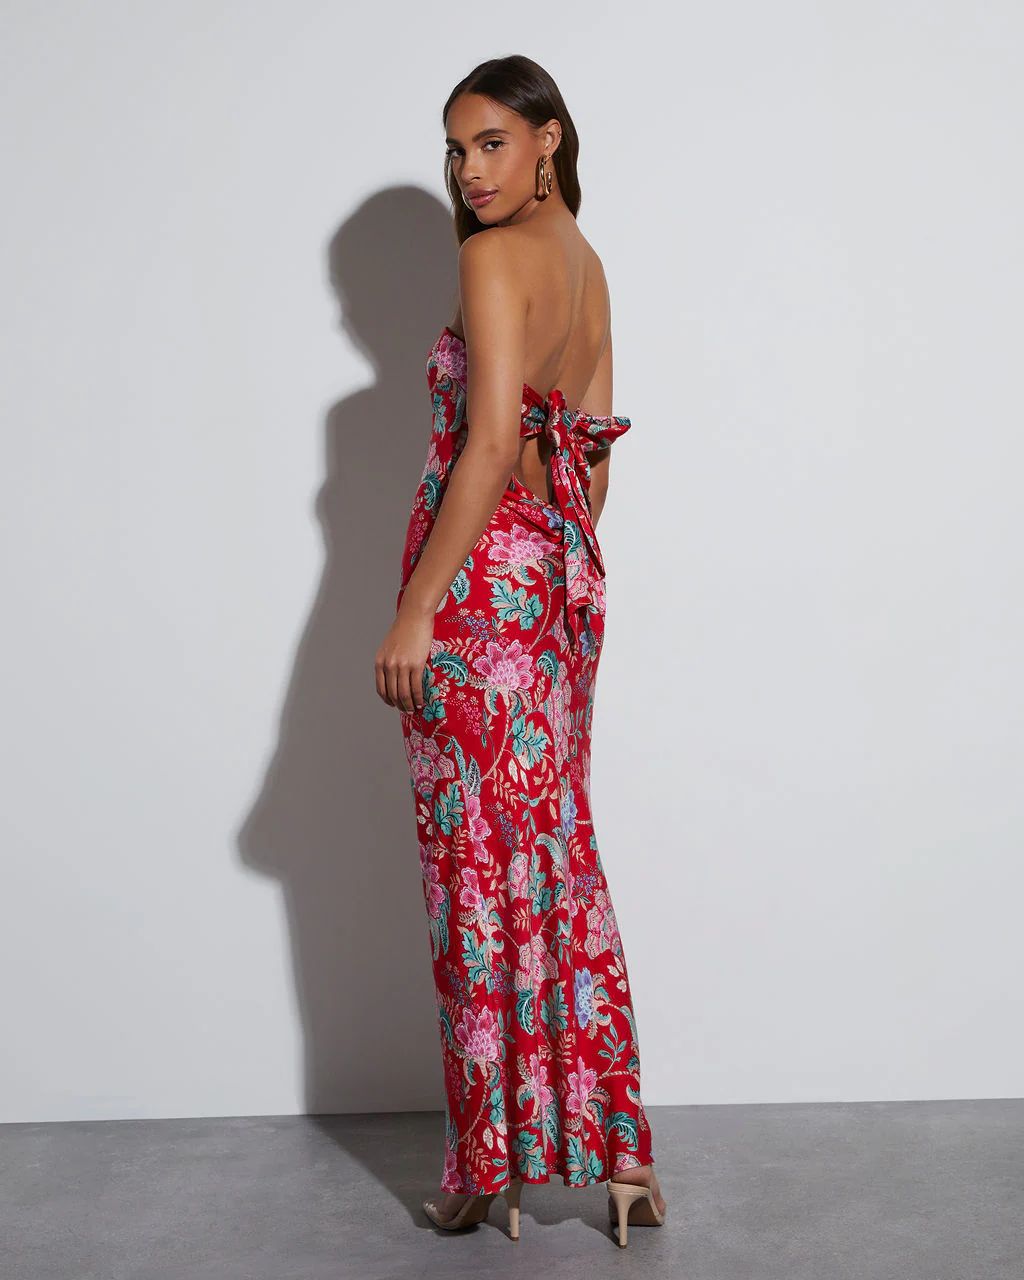 Rosemary Strapless Slip Maxi Dress | VICI Collection